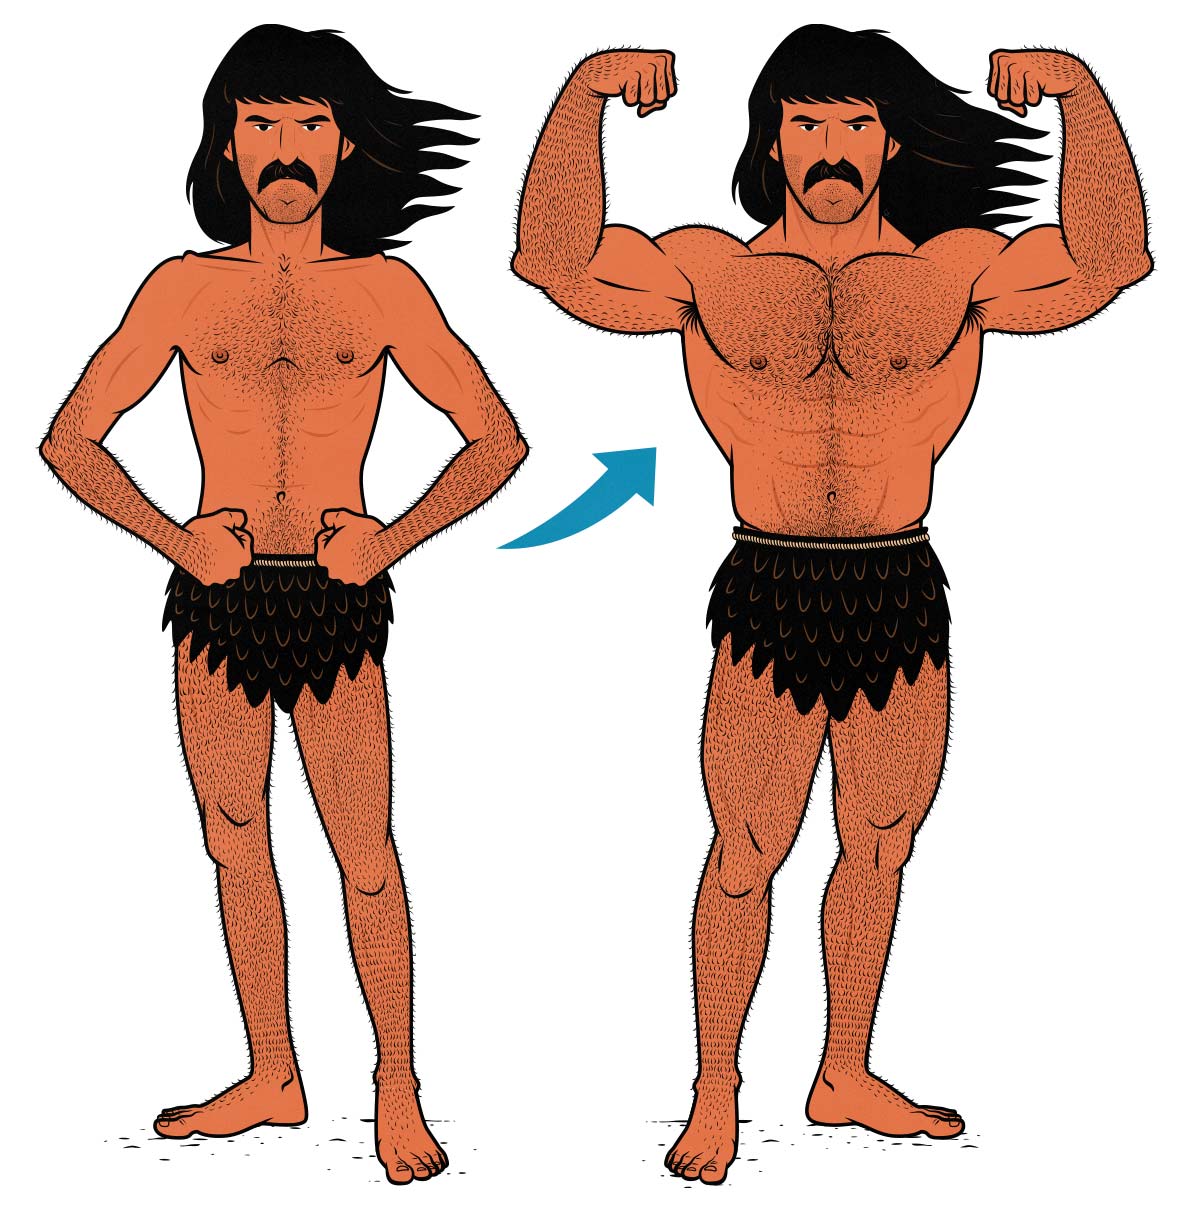 Illustration of a skinny guy learning how to bulk up and becoming muscular.